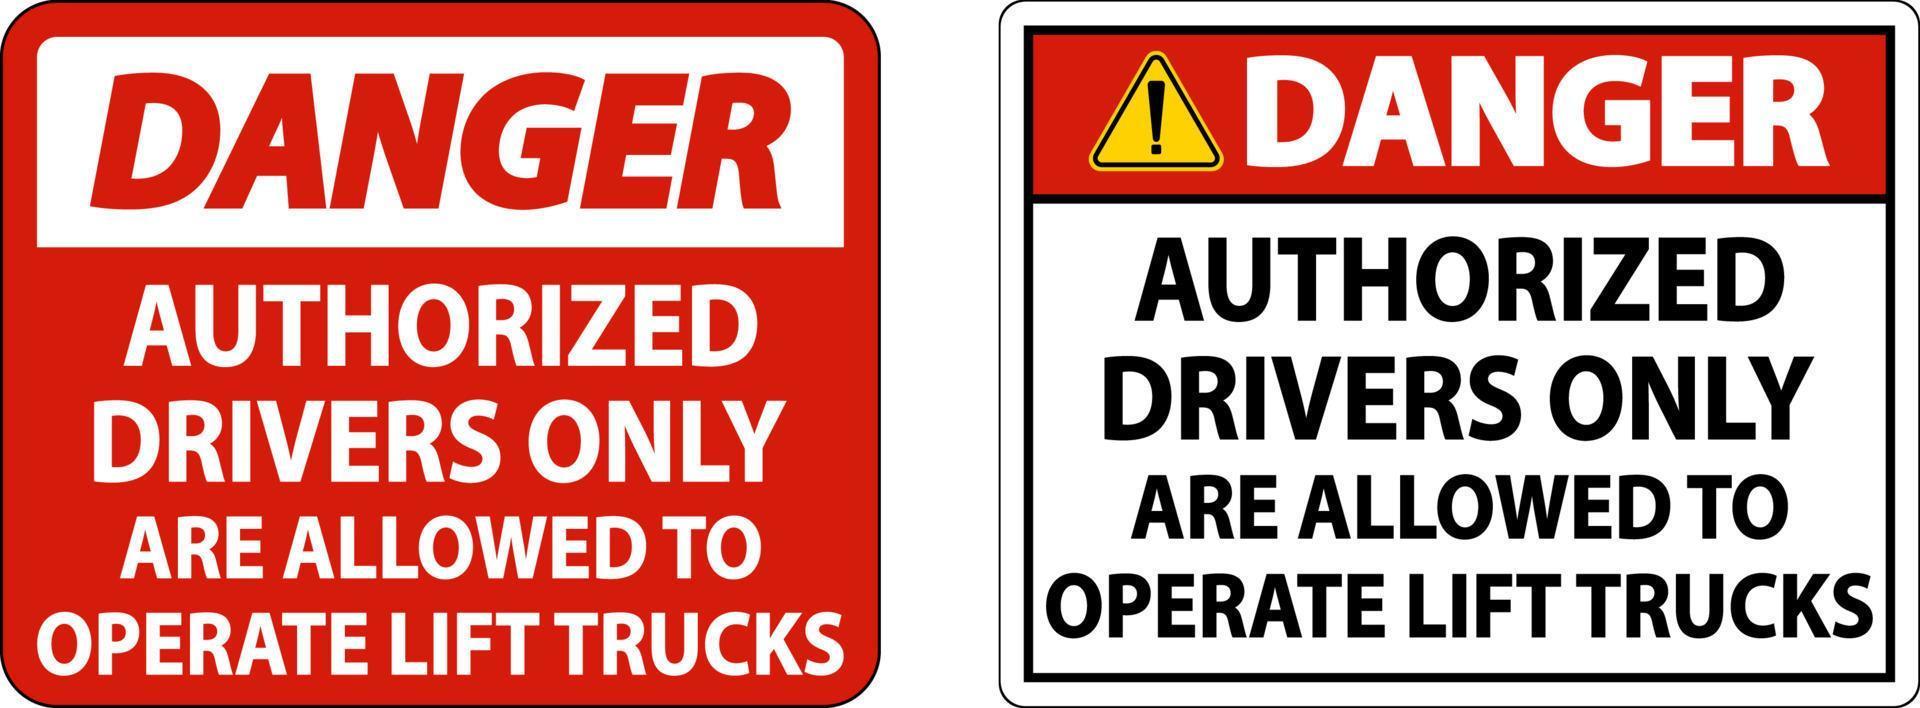 Danger Authorized Drivers Only Sign On White Background vector